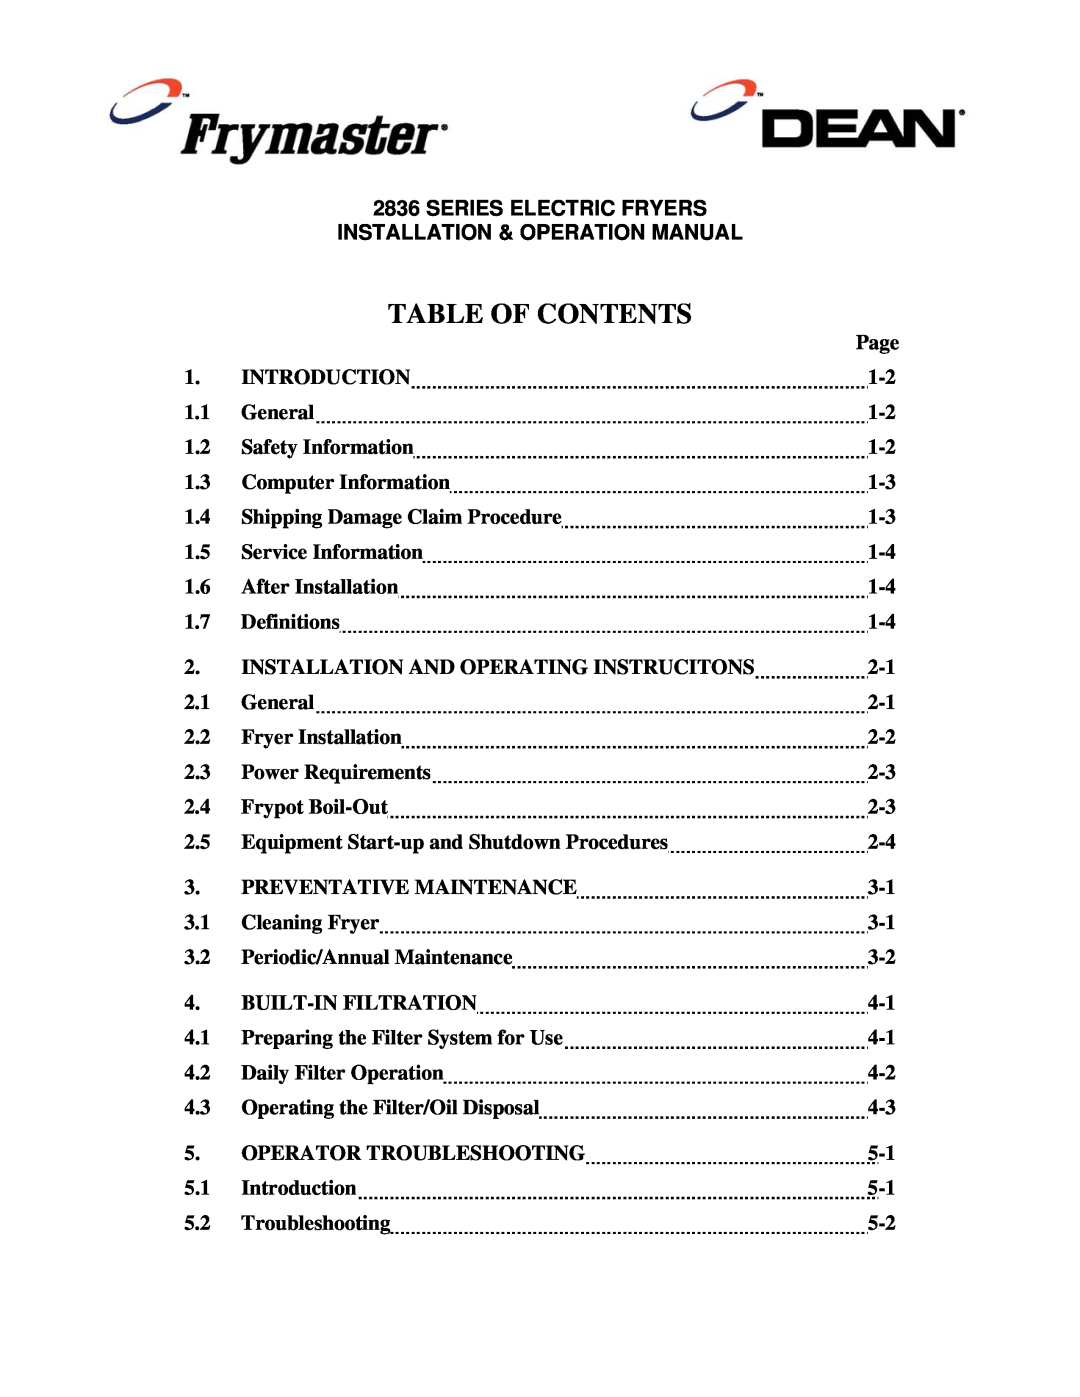 Frymaster 2836 Series Table Of Contents, Series Electric Fryers, Page, Introduction, General, Safety Information 